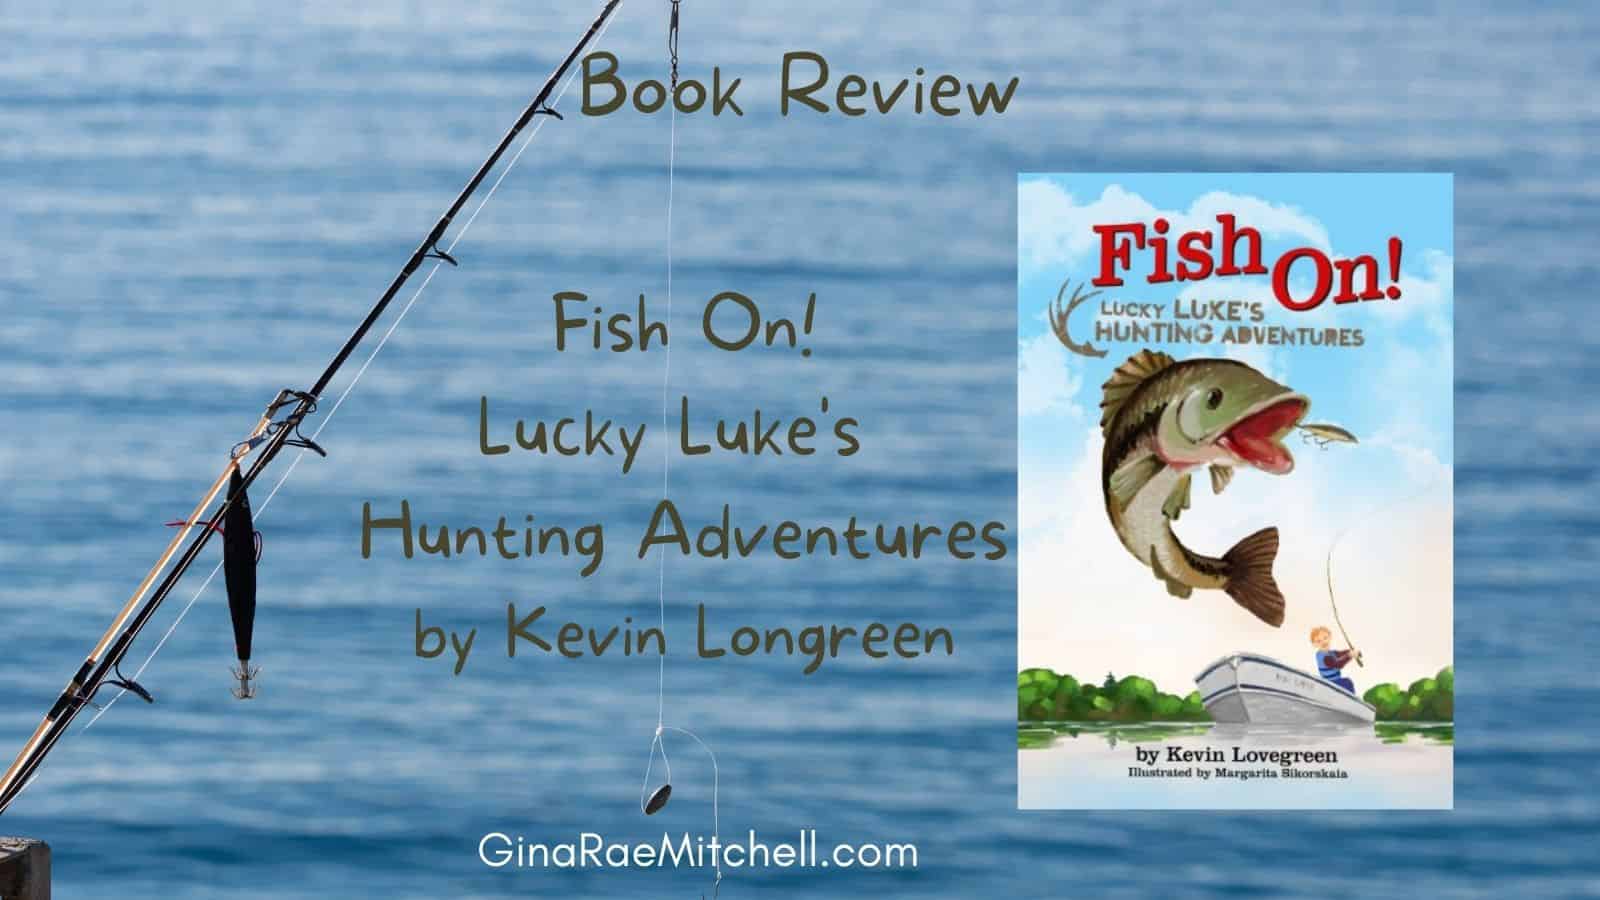 Fish On! by Kevin Lovegreen (Part of the Lucky Luke's Hunting Adventures series) | Book Review, 4.6 of 5